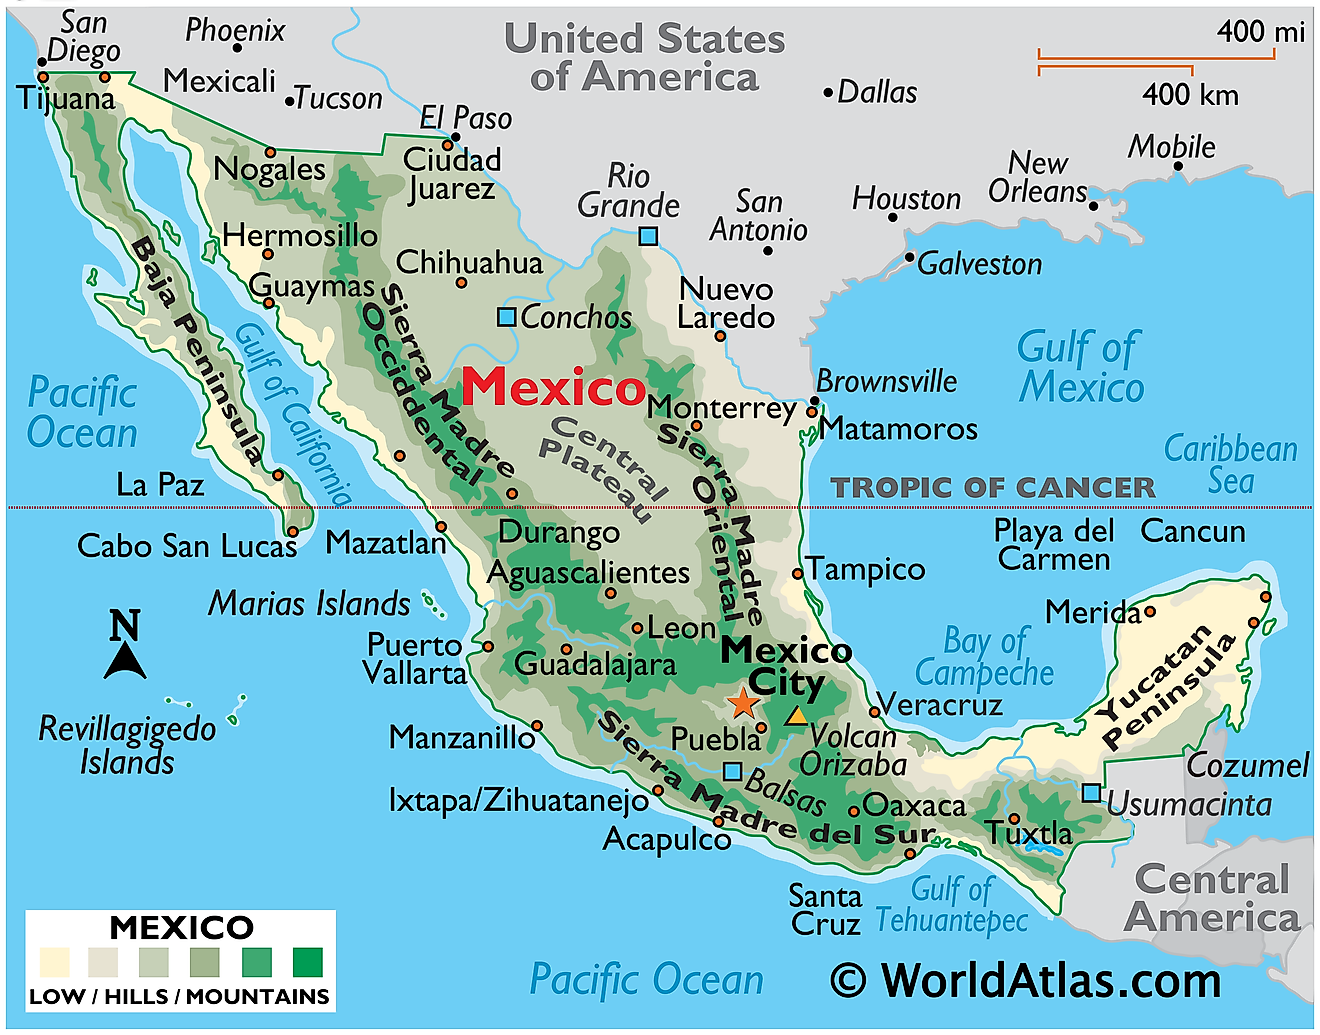 Physical Map of Mexico showing relief, major mountain ranges, the Yucatan Peninsula, Baja Peninsula, volcanoes, major cities, islands, international borders, and more.